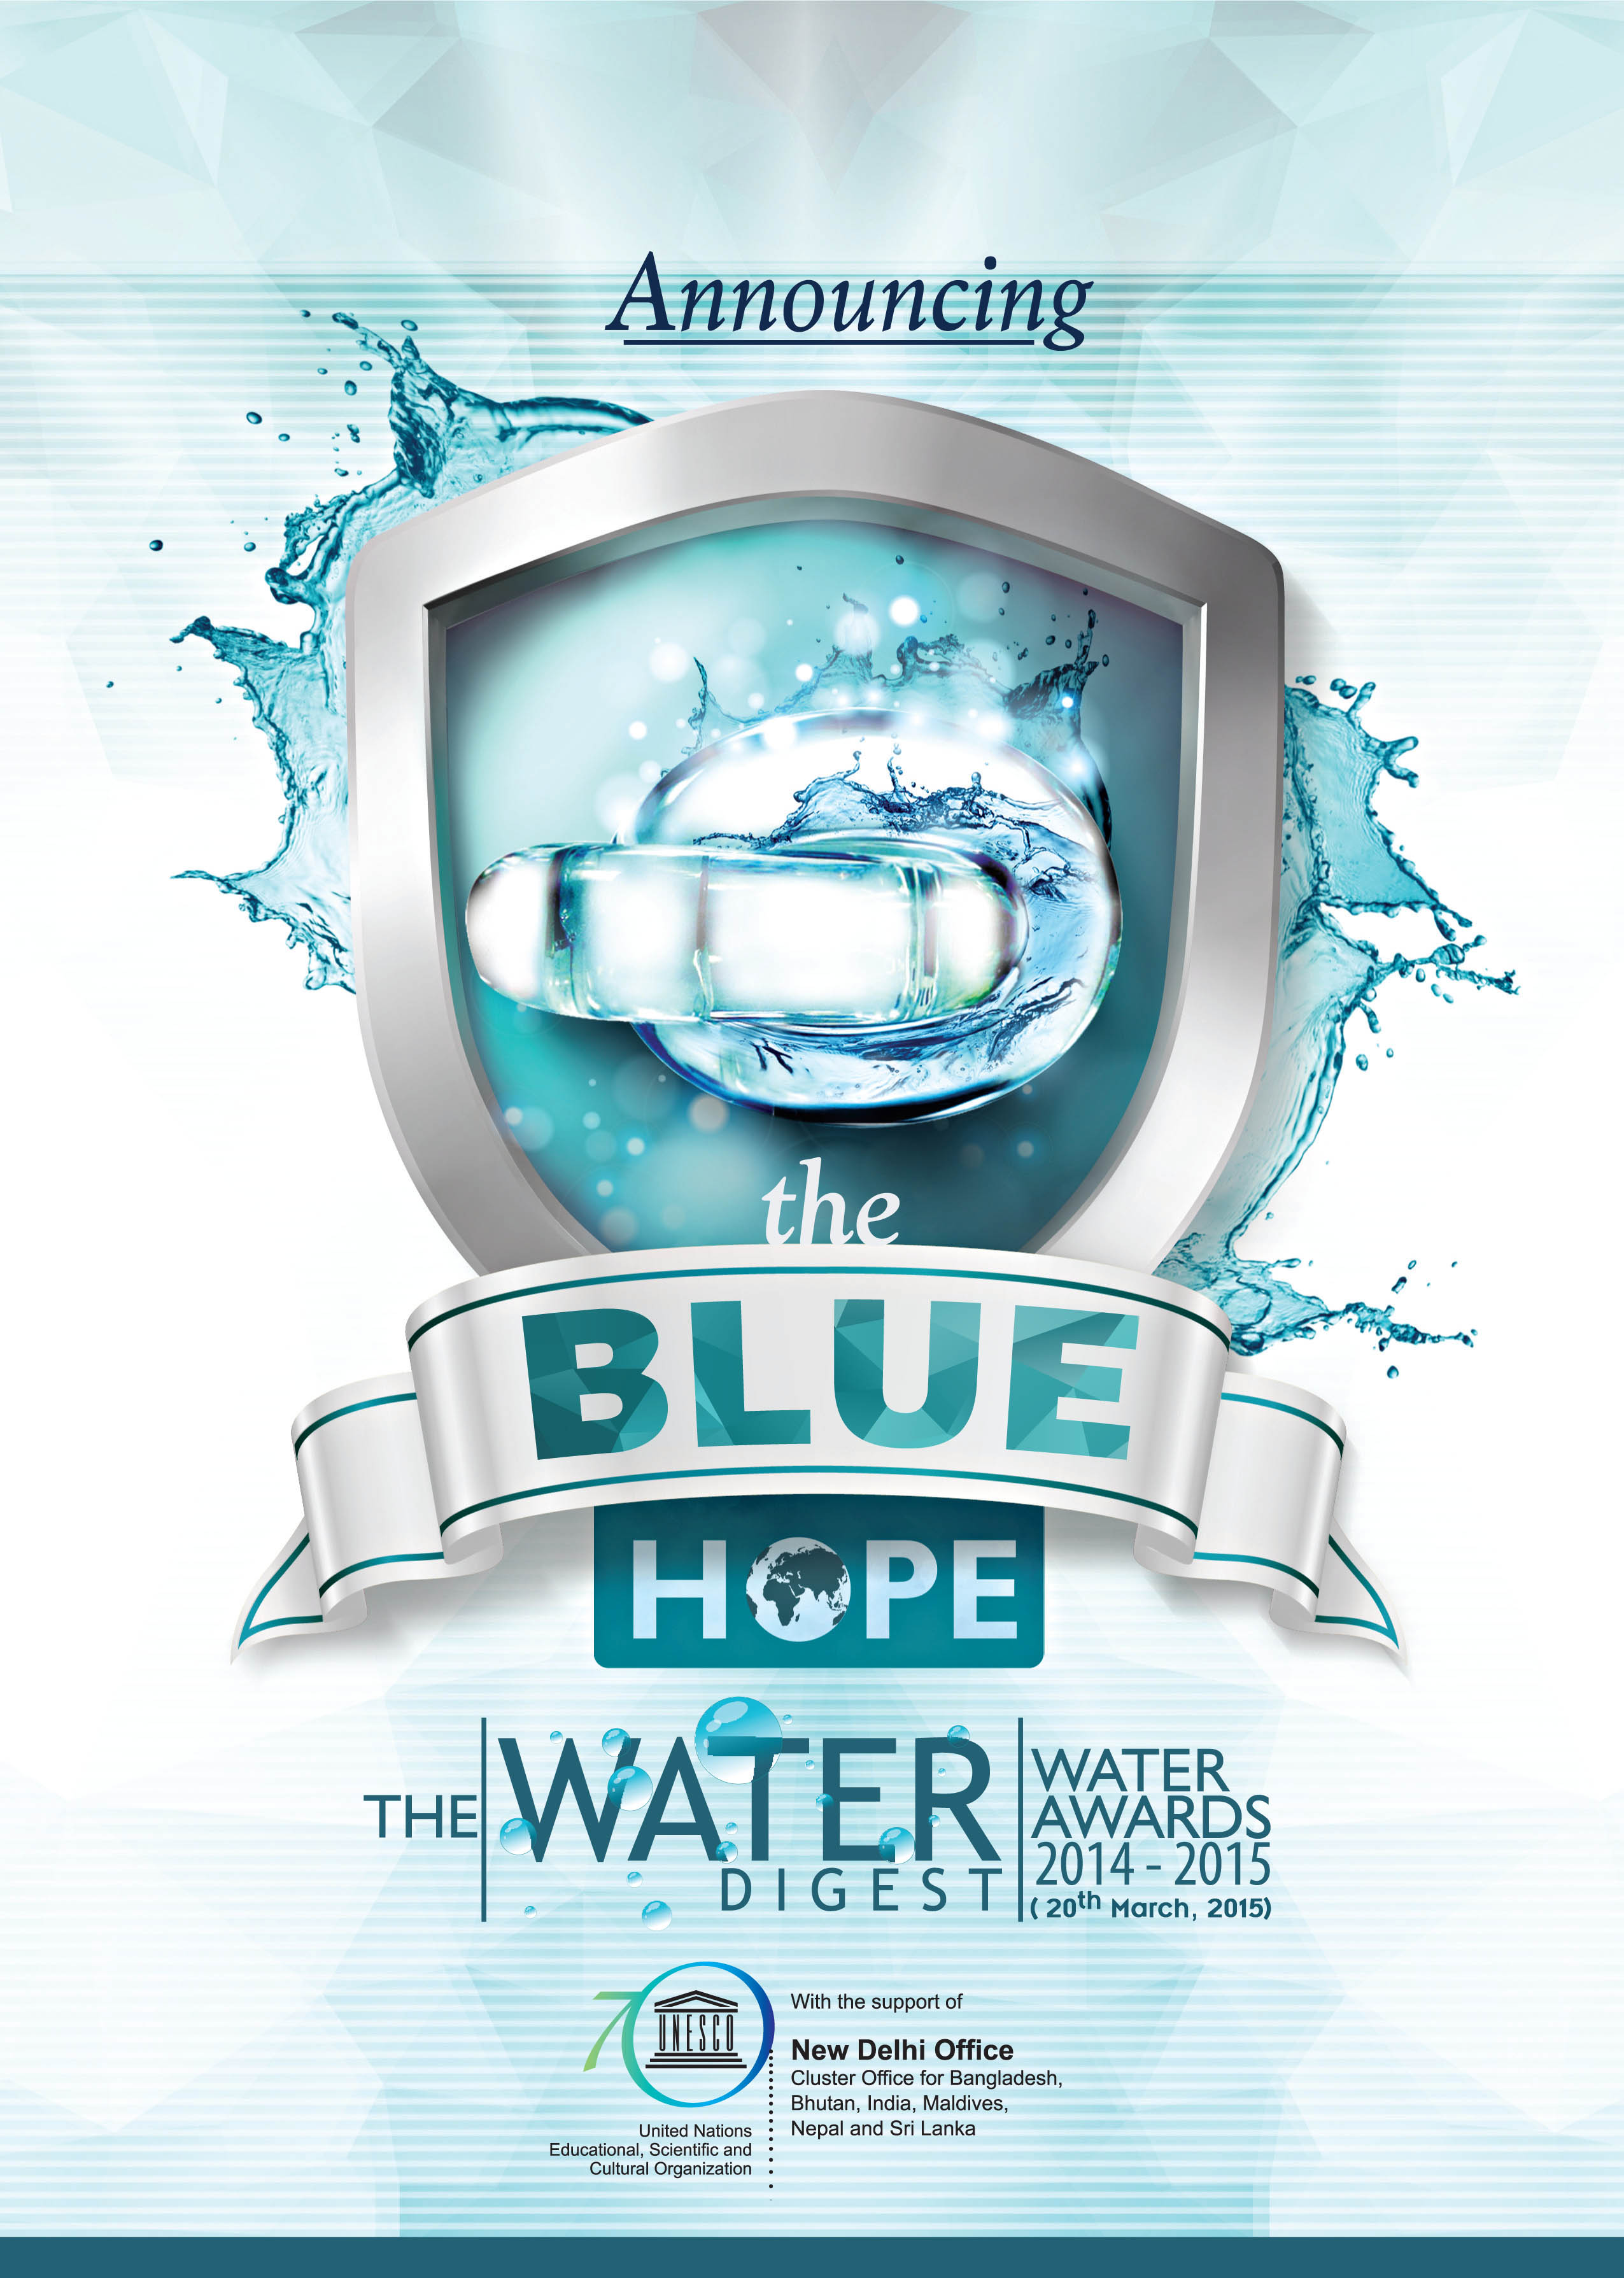 Announcing Water Digest Water Awards on 20th March 2015